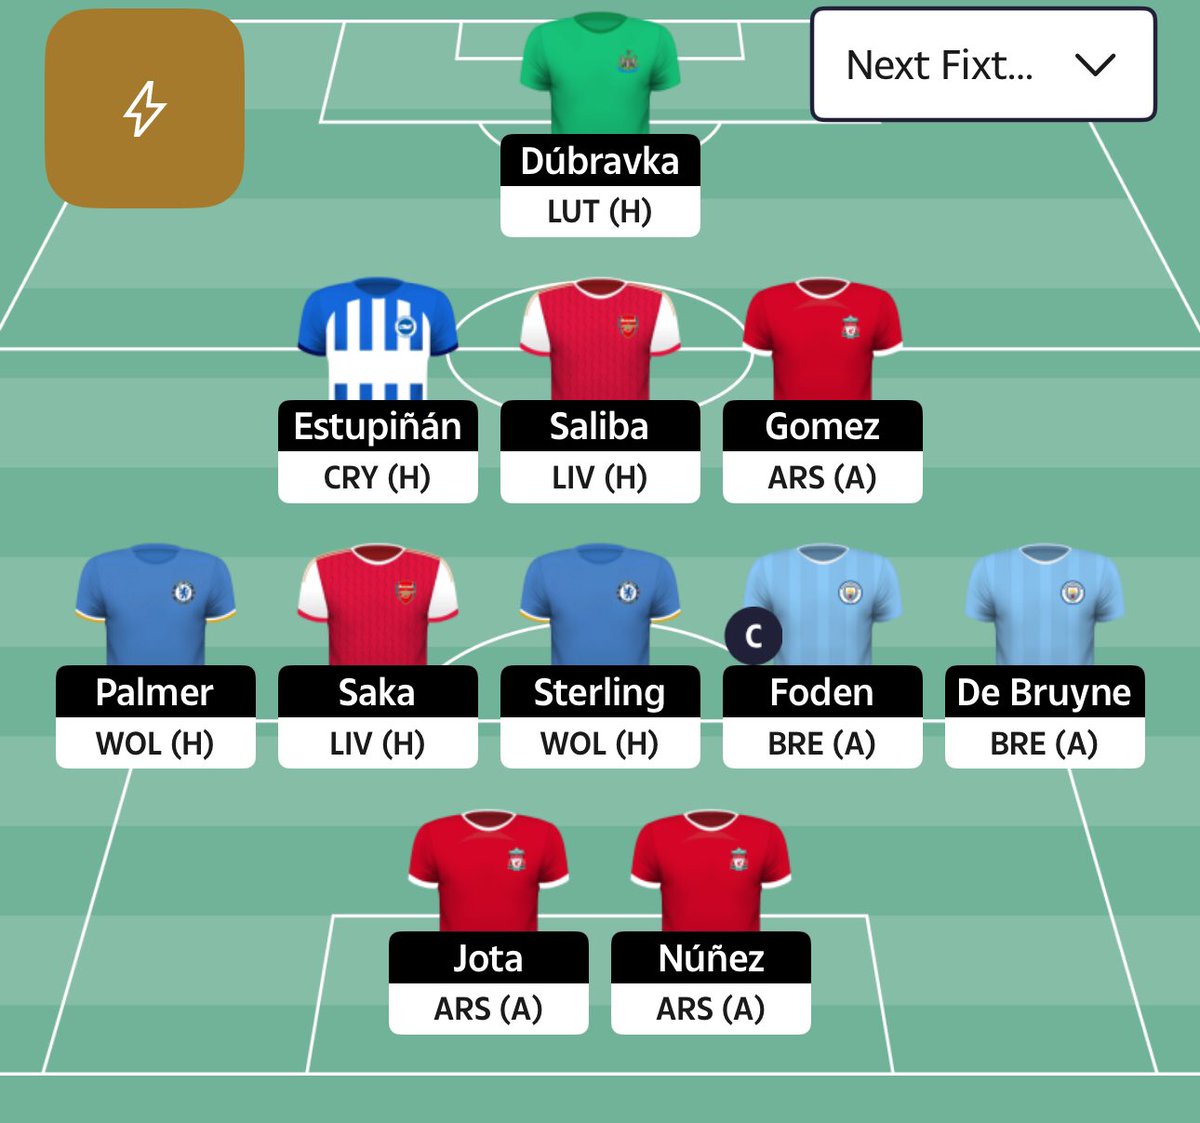 GW21 DREAM TEAM ⚽️ 
OUT: GUSTO & WATKINS
IN: ESTUPINAN & KDB

Was hoping for some city leaks.
50/50 on Foden or Jota for the captaincy. I’ve gone with Foden 🙏 Expect him to be more reliable for minutes.

Watkins is going to show up now isn’t he 😆 GL all